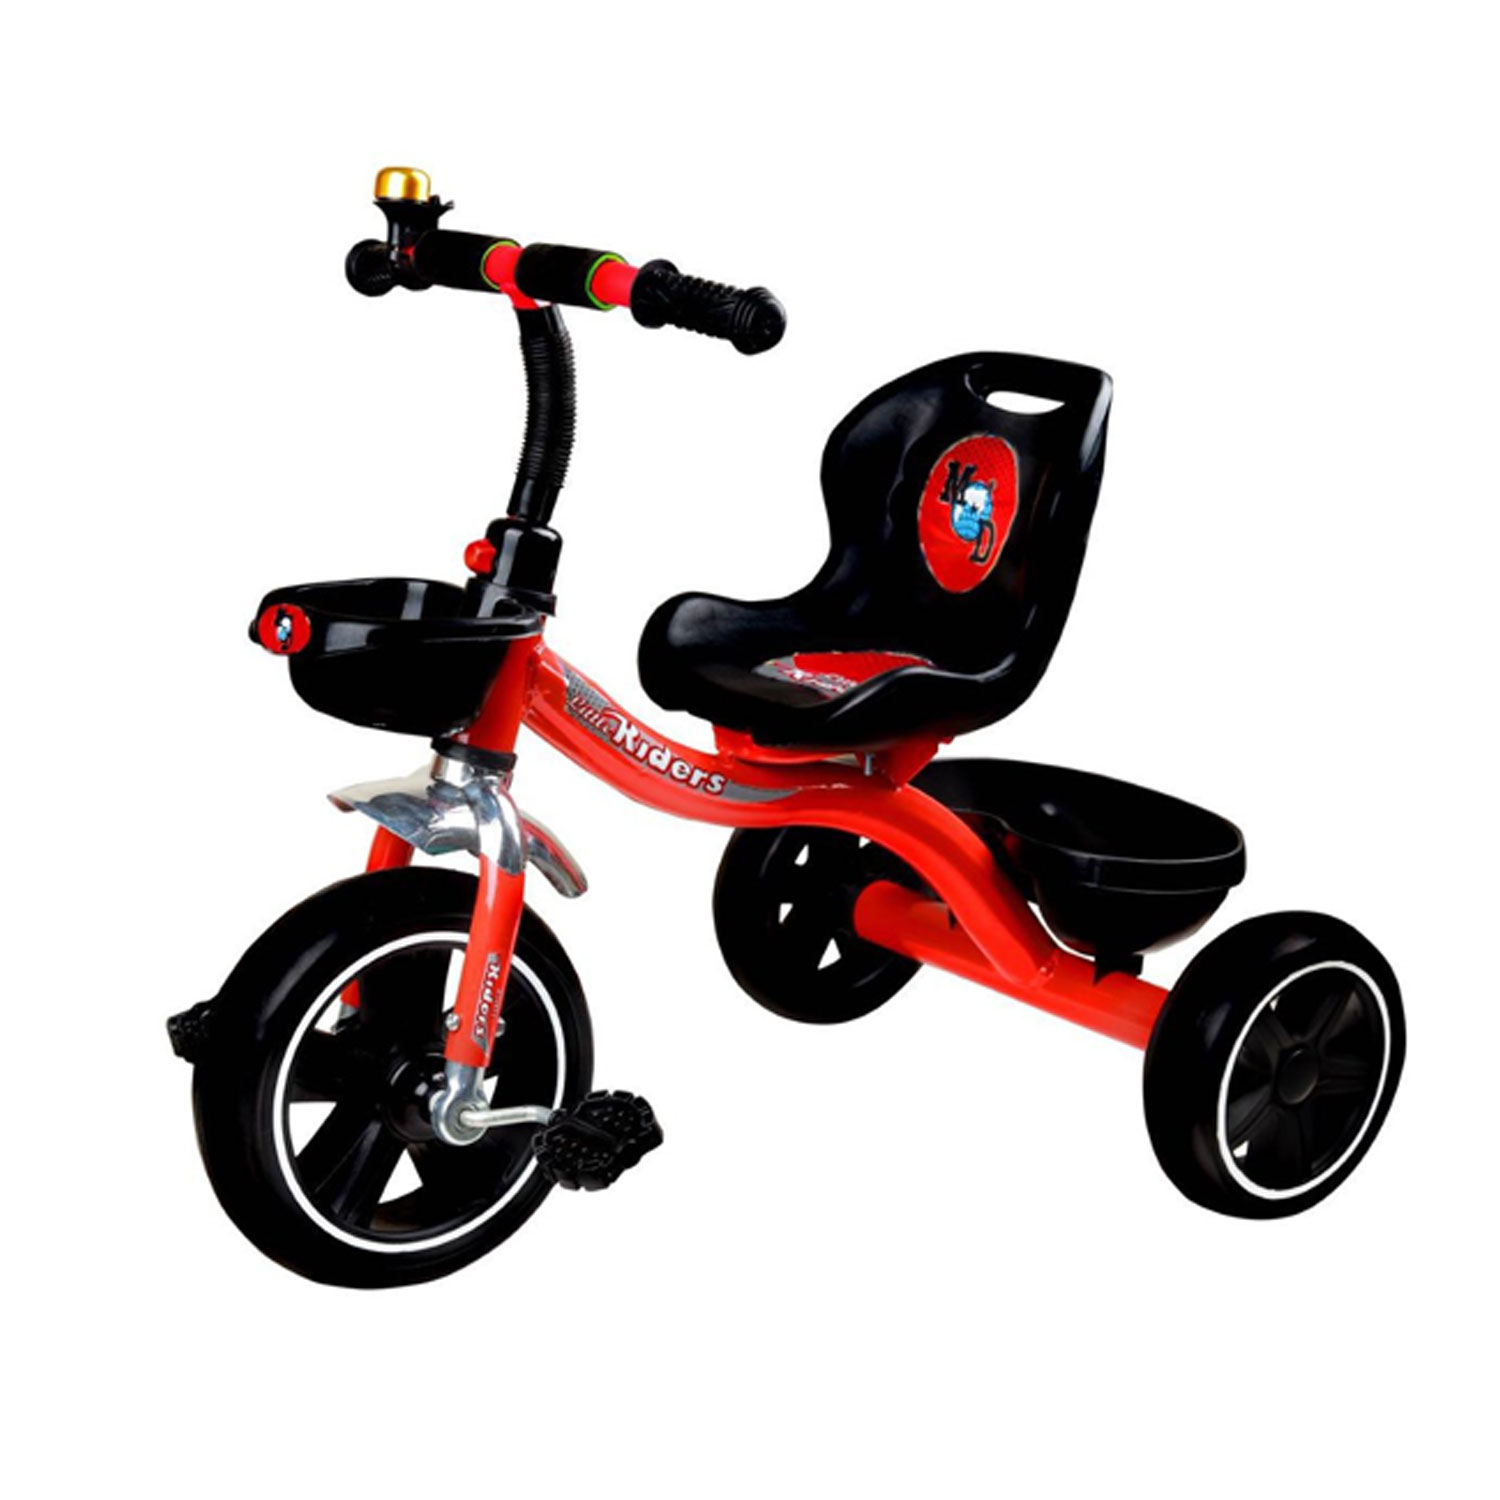 NAVRANGI BABY TRICYCLE FOR KIDS WITH FRONT OR BACK BASKET AND PARENT HANDLE. TRICYCLE FOR KIDS KBQ-173 